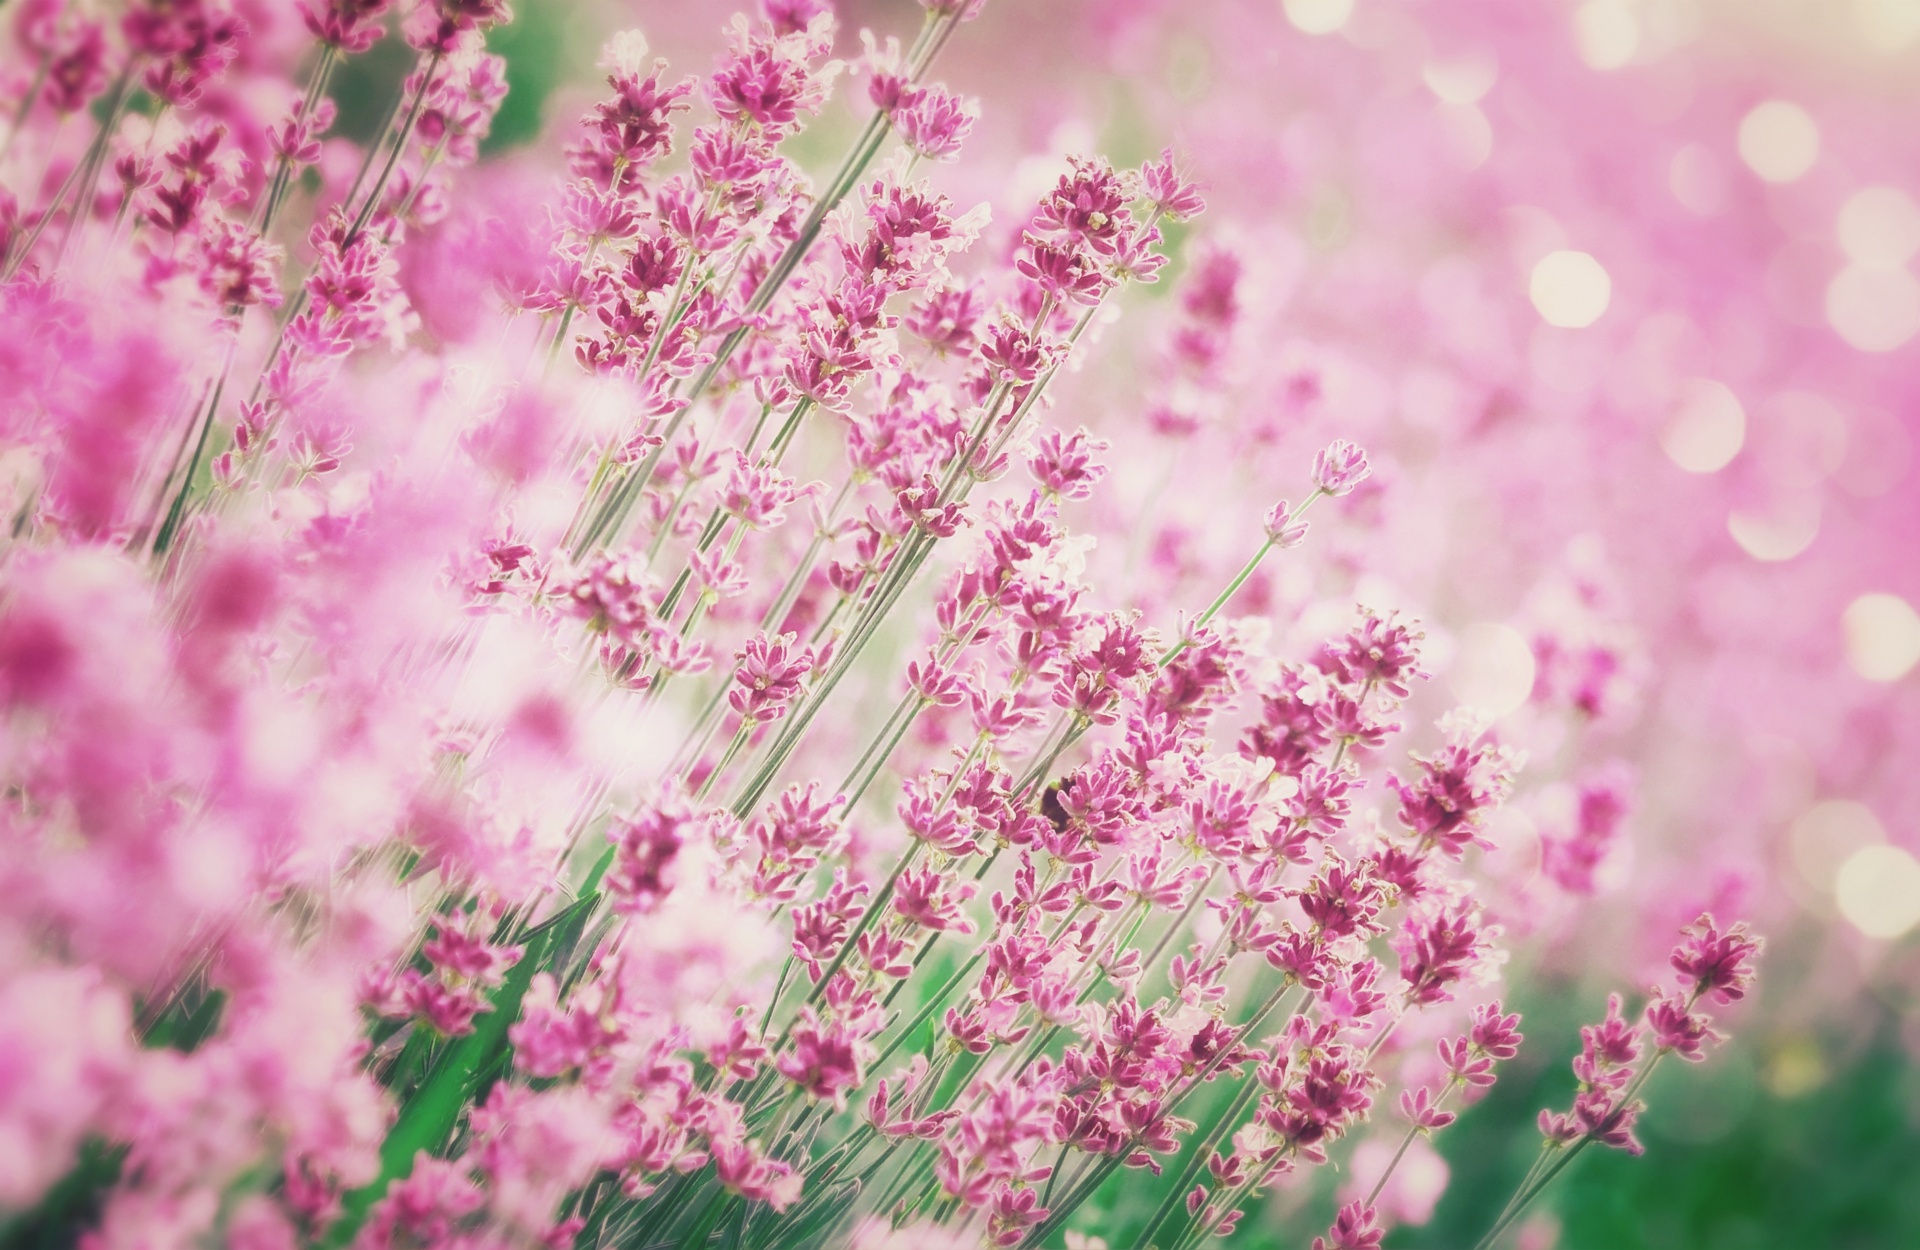 Lavender flowers blossoms wildflowers wild meadow flower meadow photo photography closeup